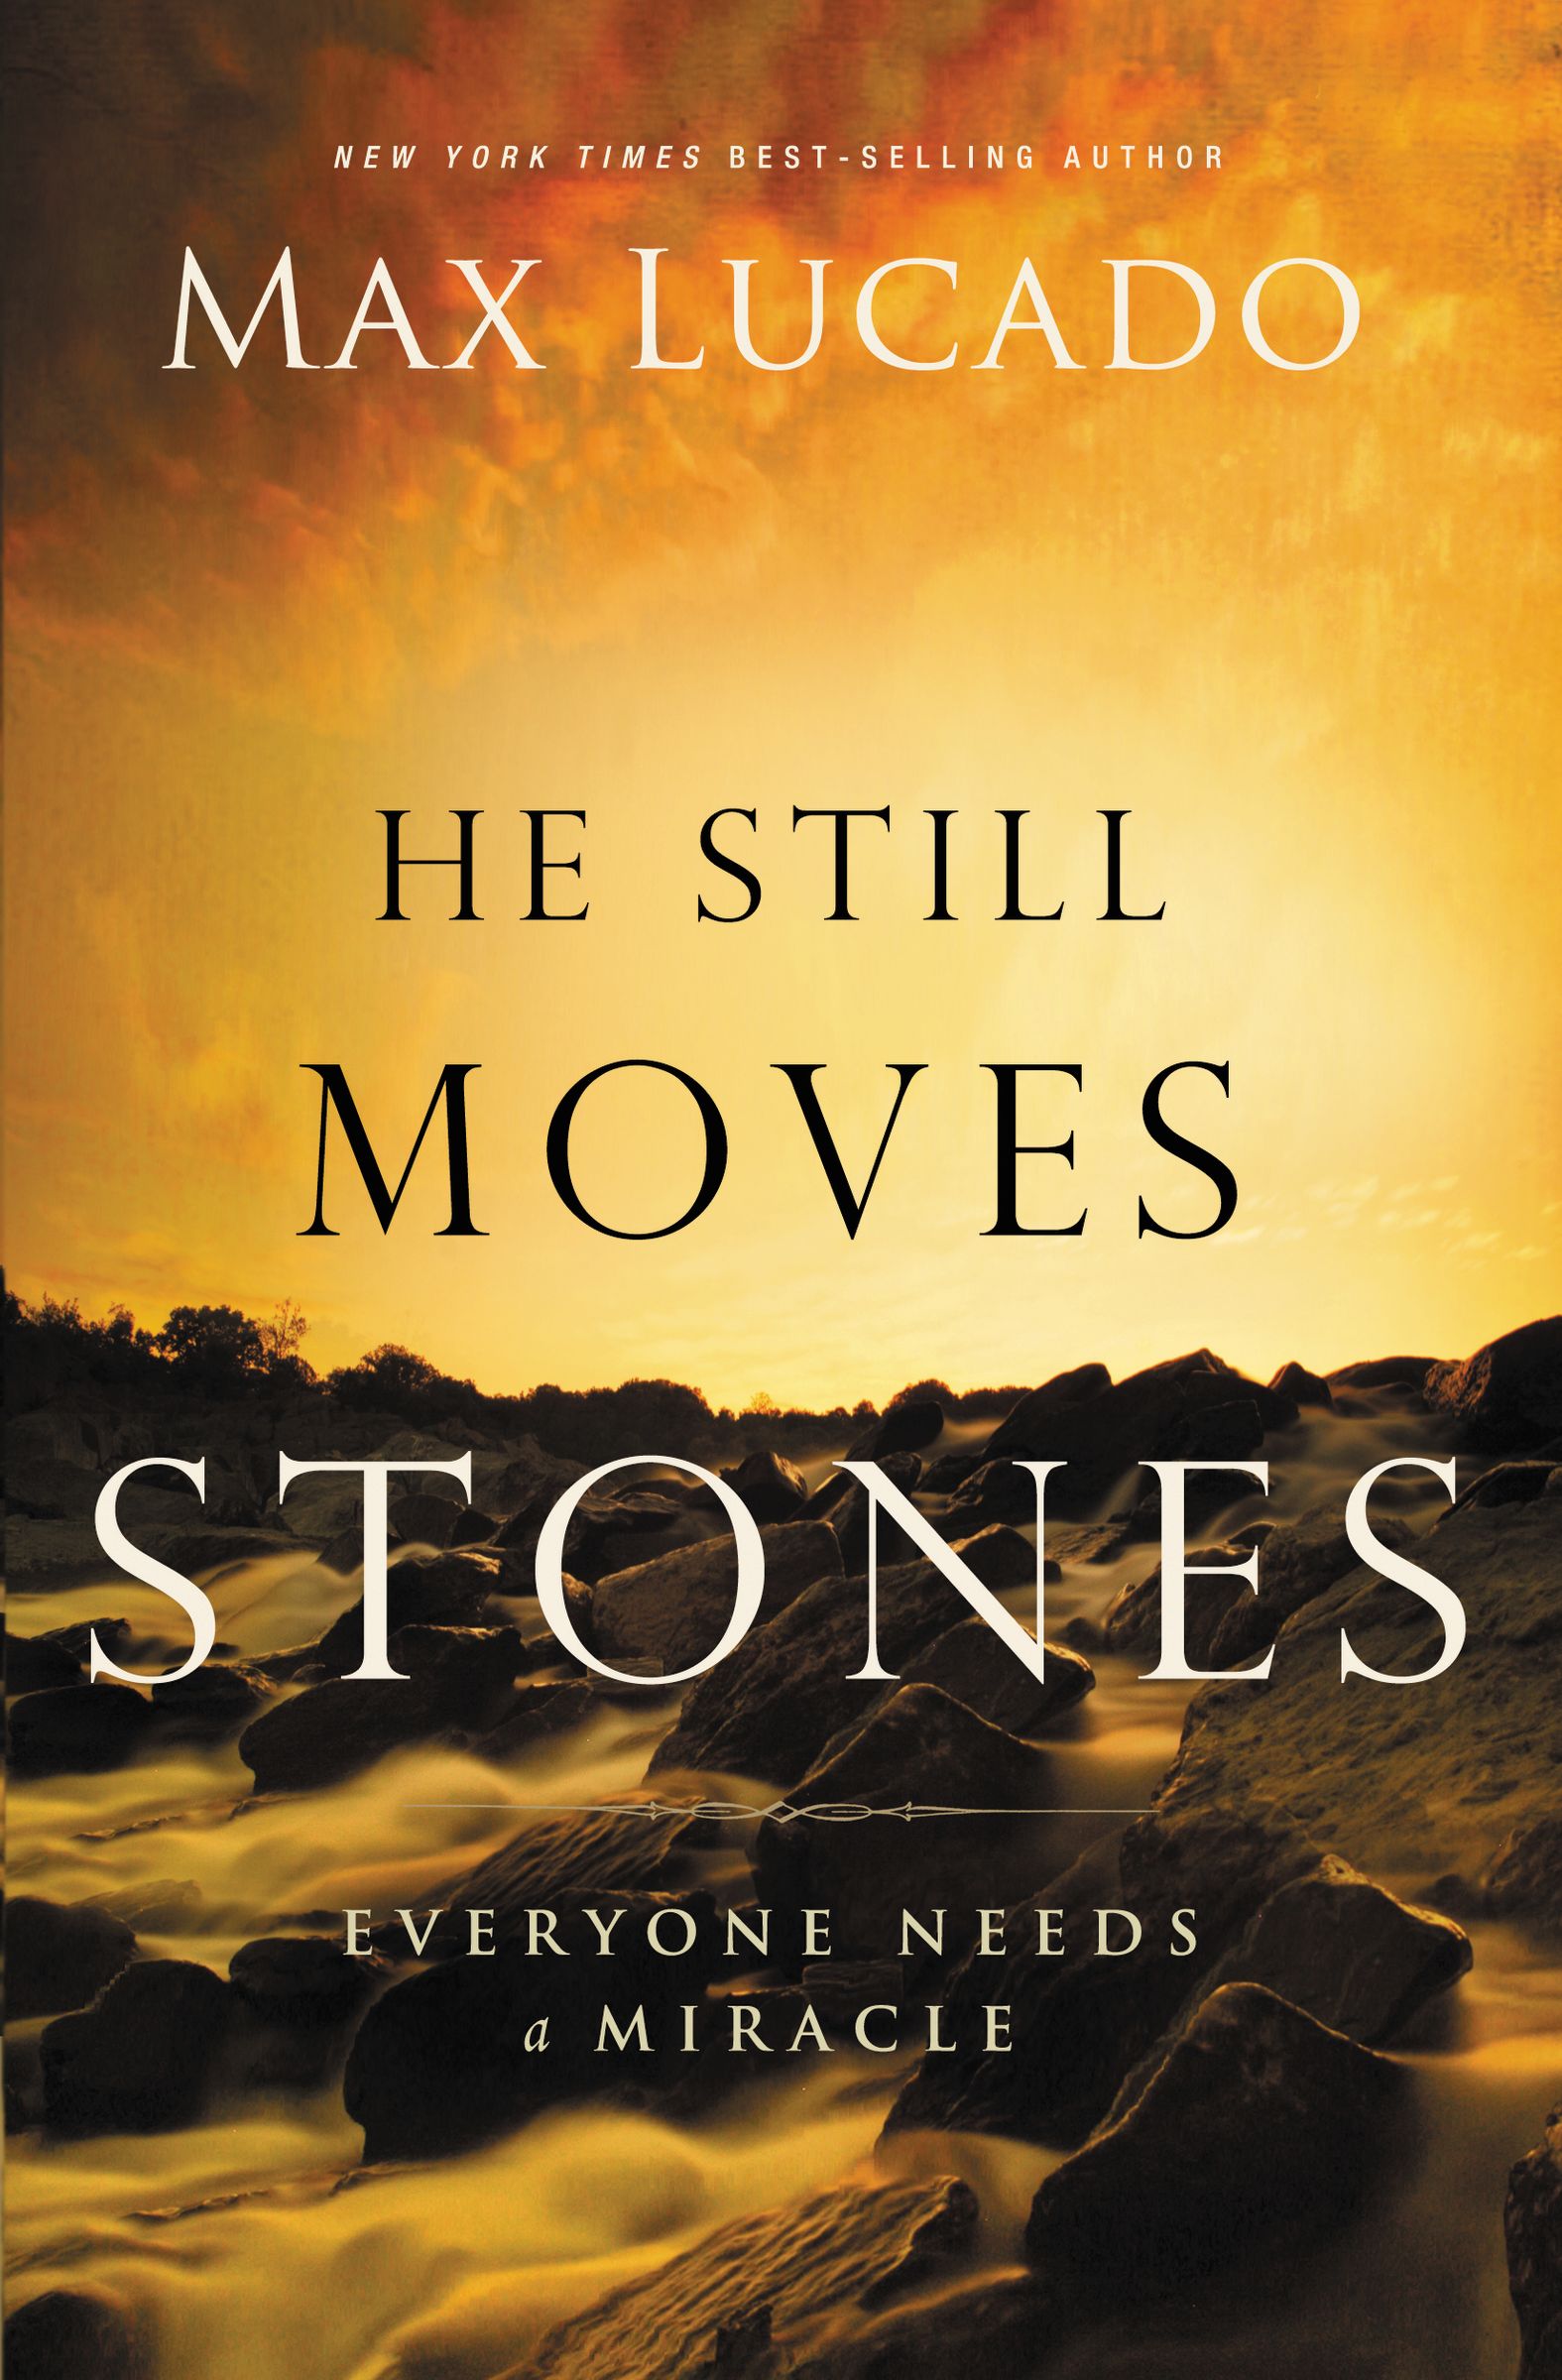 Image of He Still Moves Stones other